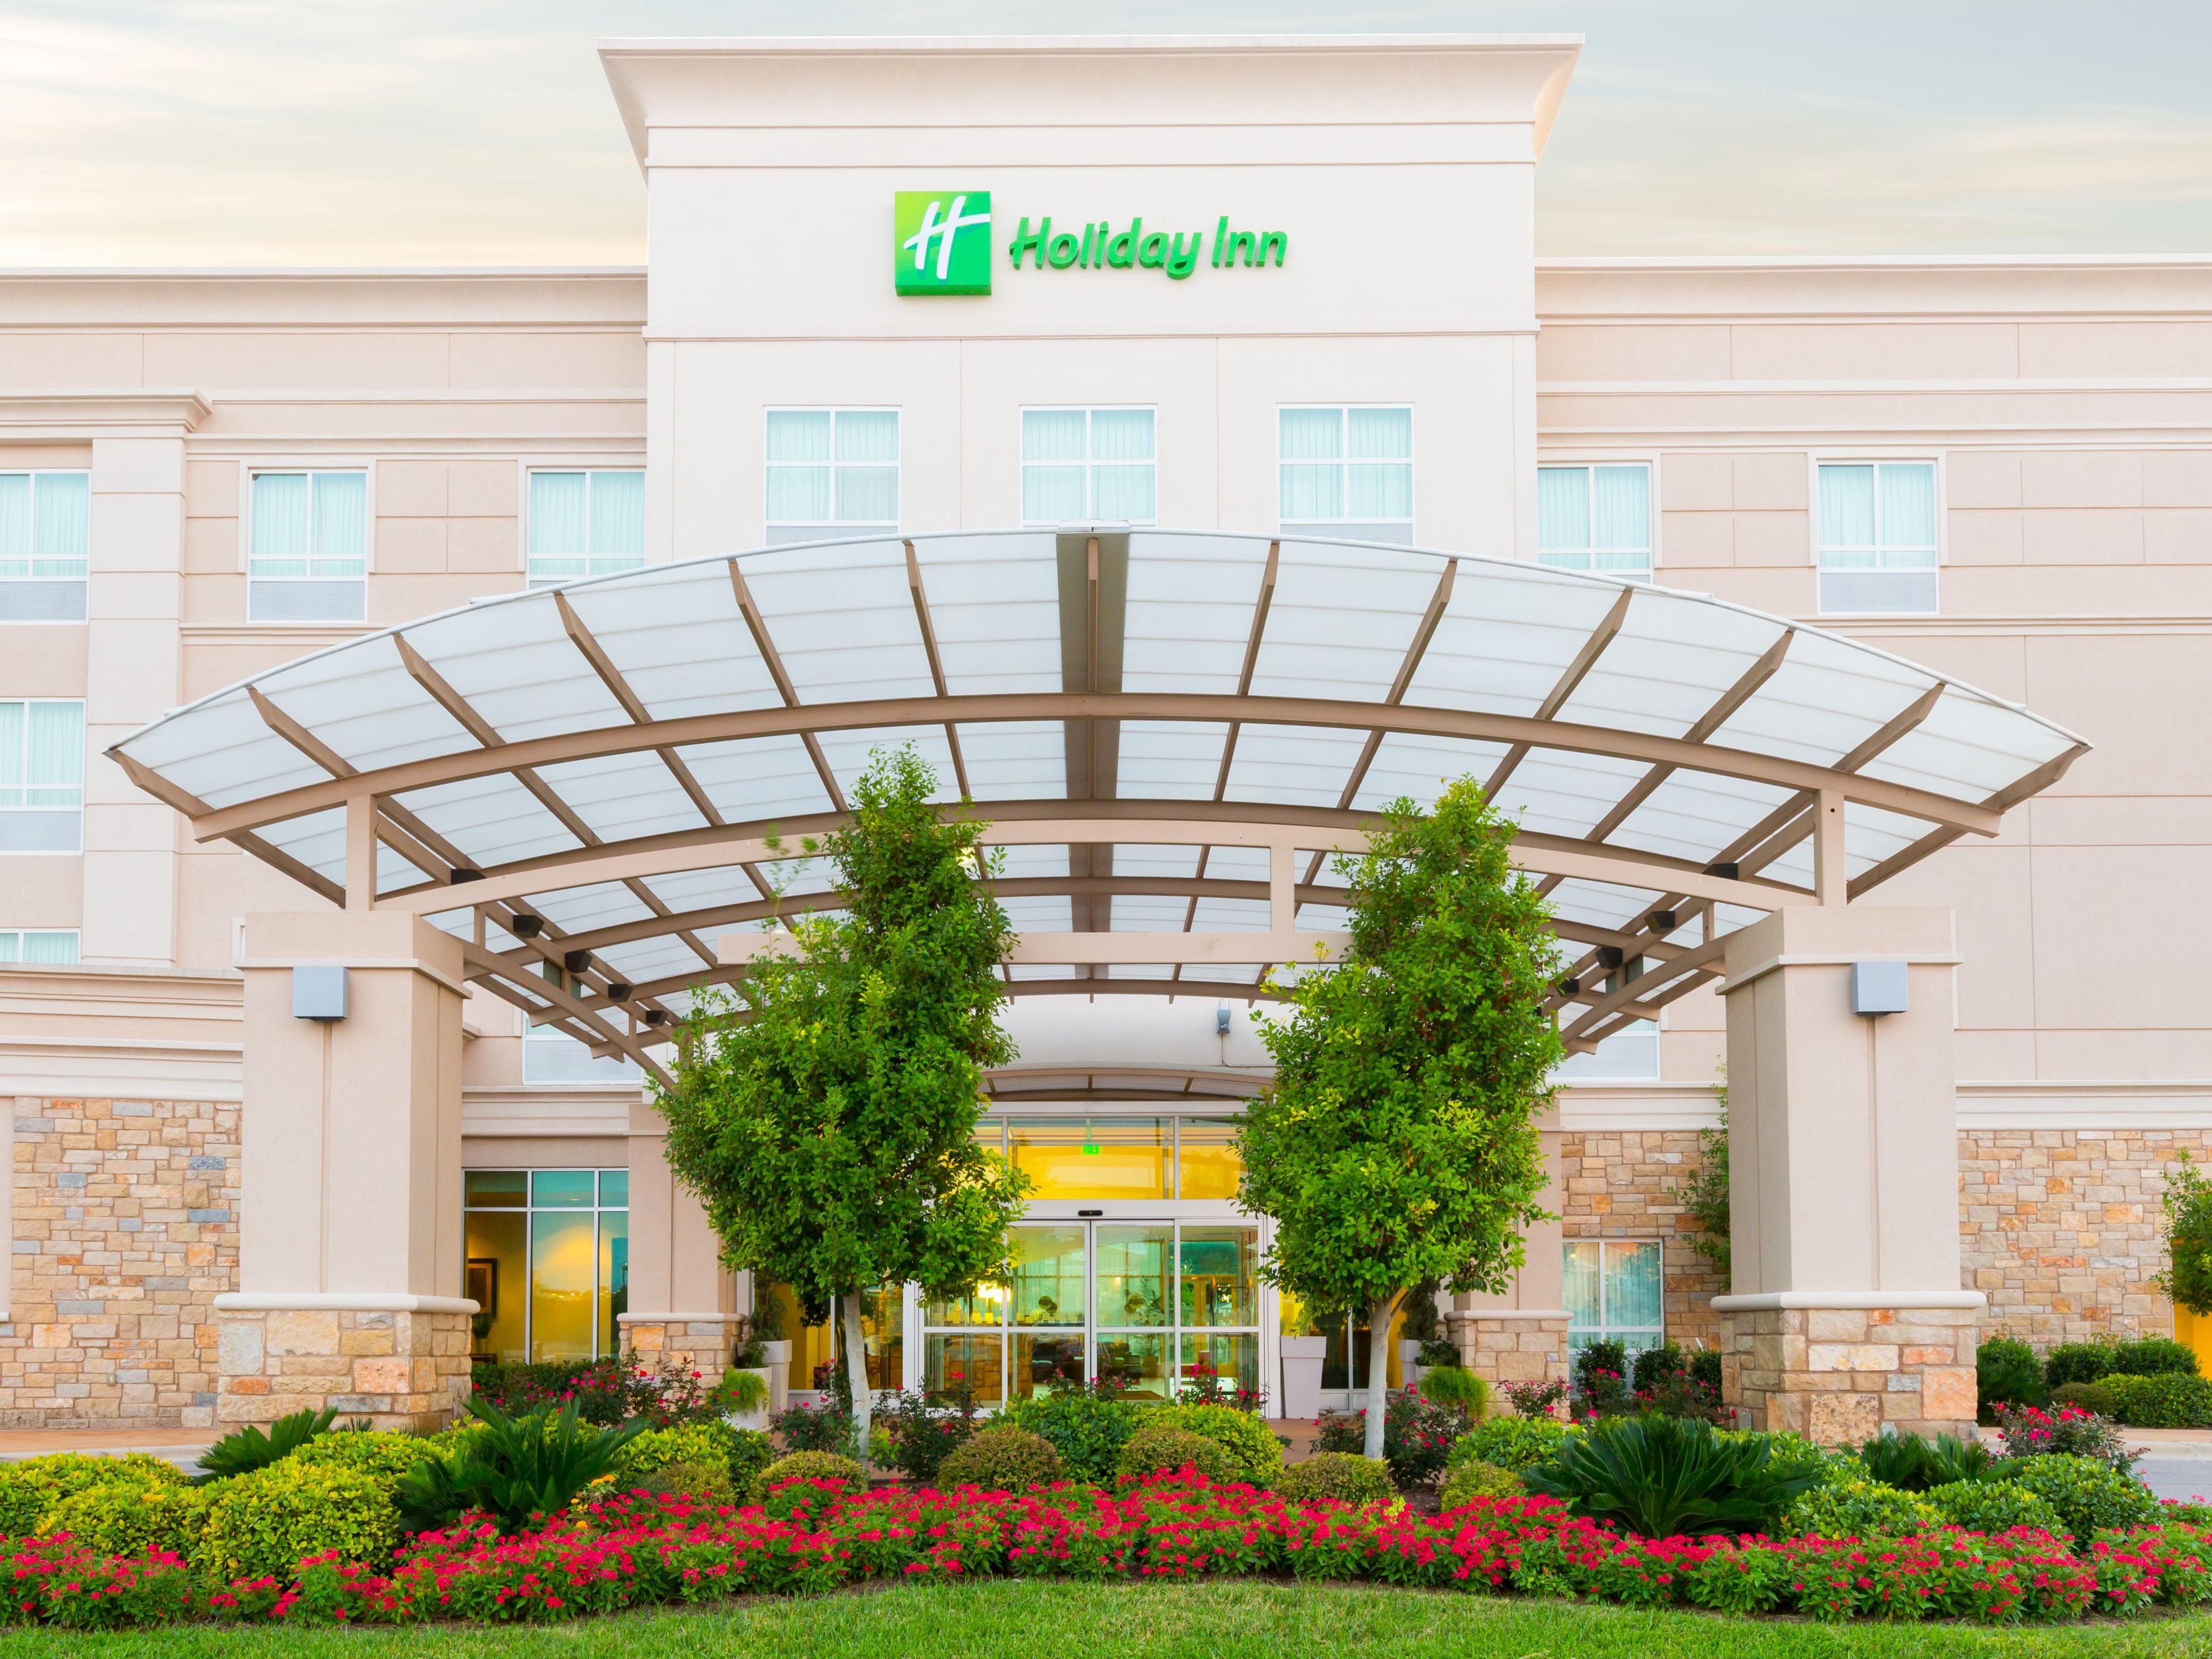 Closest full-service hotel to UMHB (5.1 Miles) and Cadence Bank Center/Bell County Expo Center (7.1 Miles). 
Located 3.5 Miles from Baylor Scott & White and Veterans Hospital. 
With our restaurant/bar onsite, we are able to ensure a great, easy stay! 